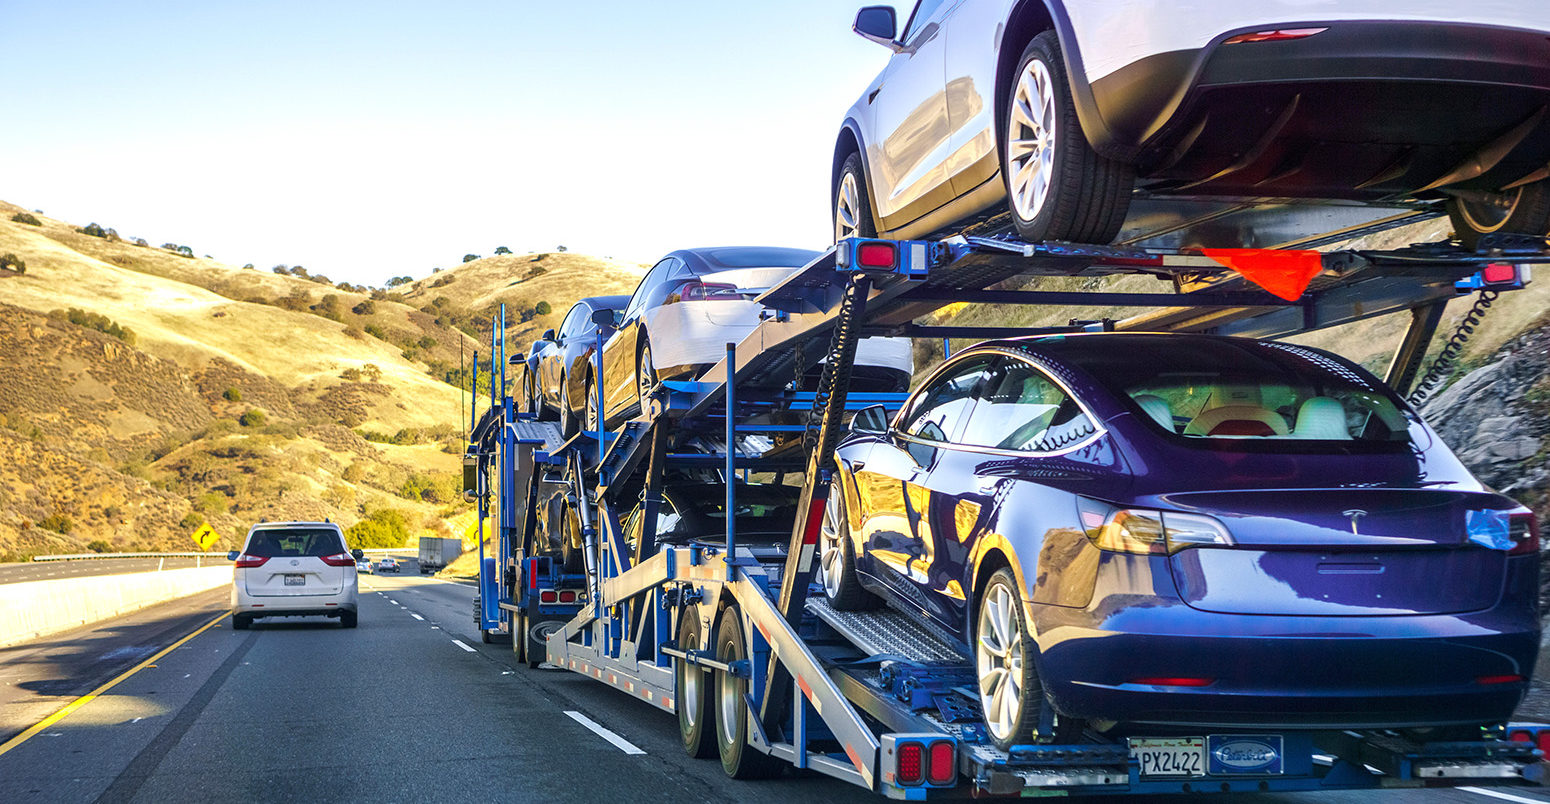 A car transporter carries new Tesla Model 3 vehicles along the highway, California, US. Credit: Andrei Stanescu / Alamy Stock Photo. R6HR26